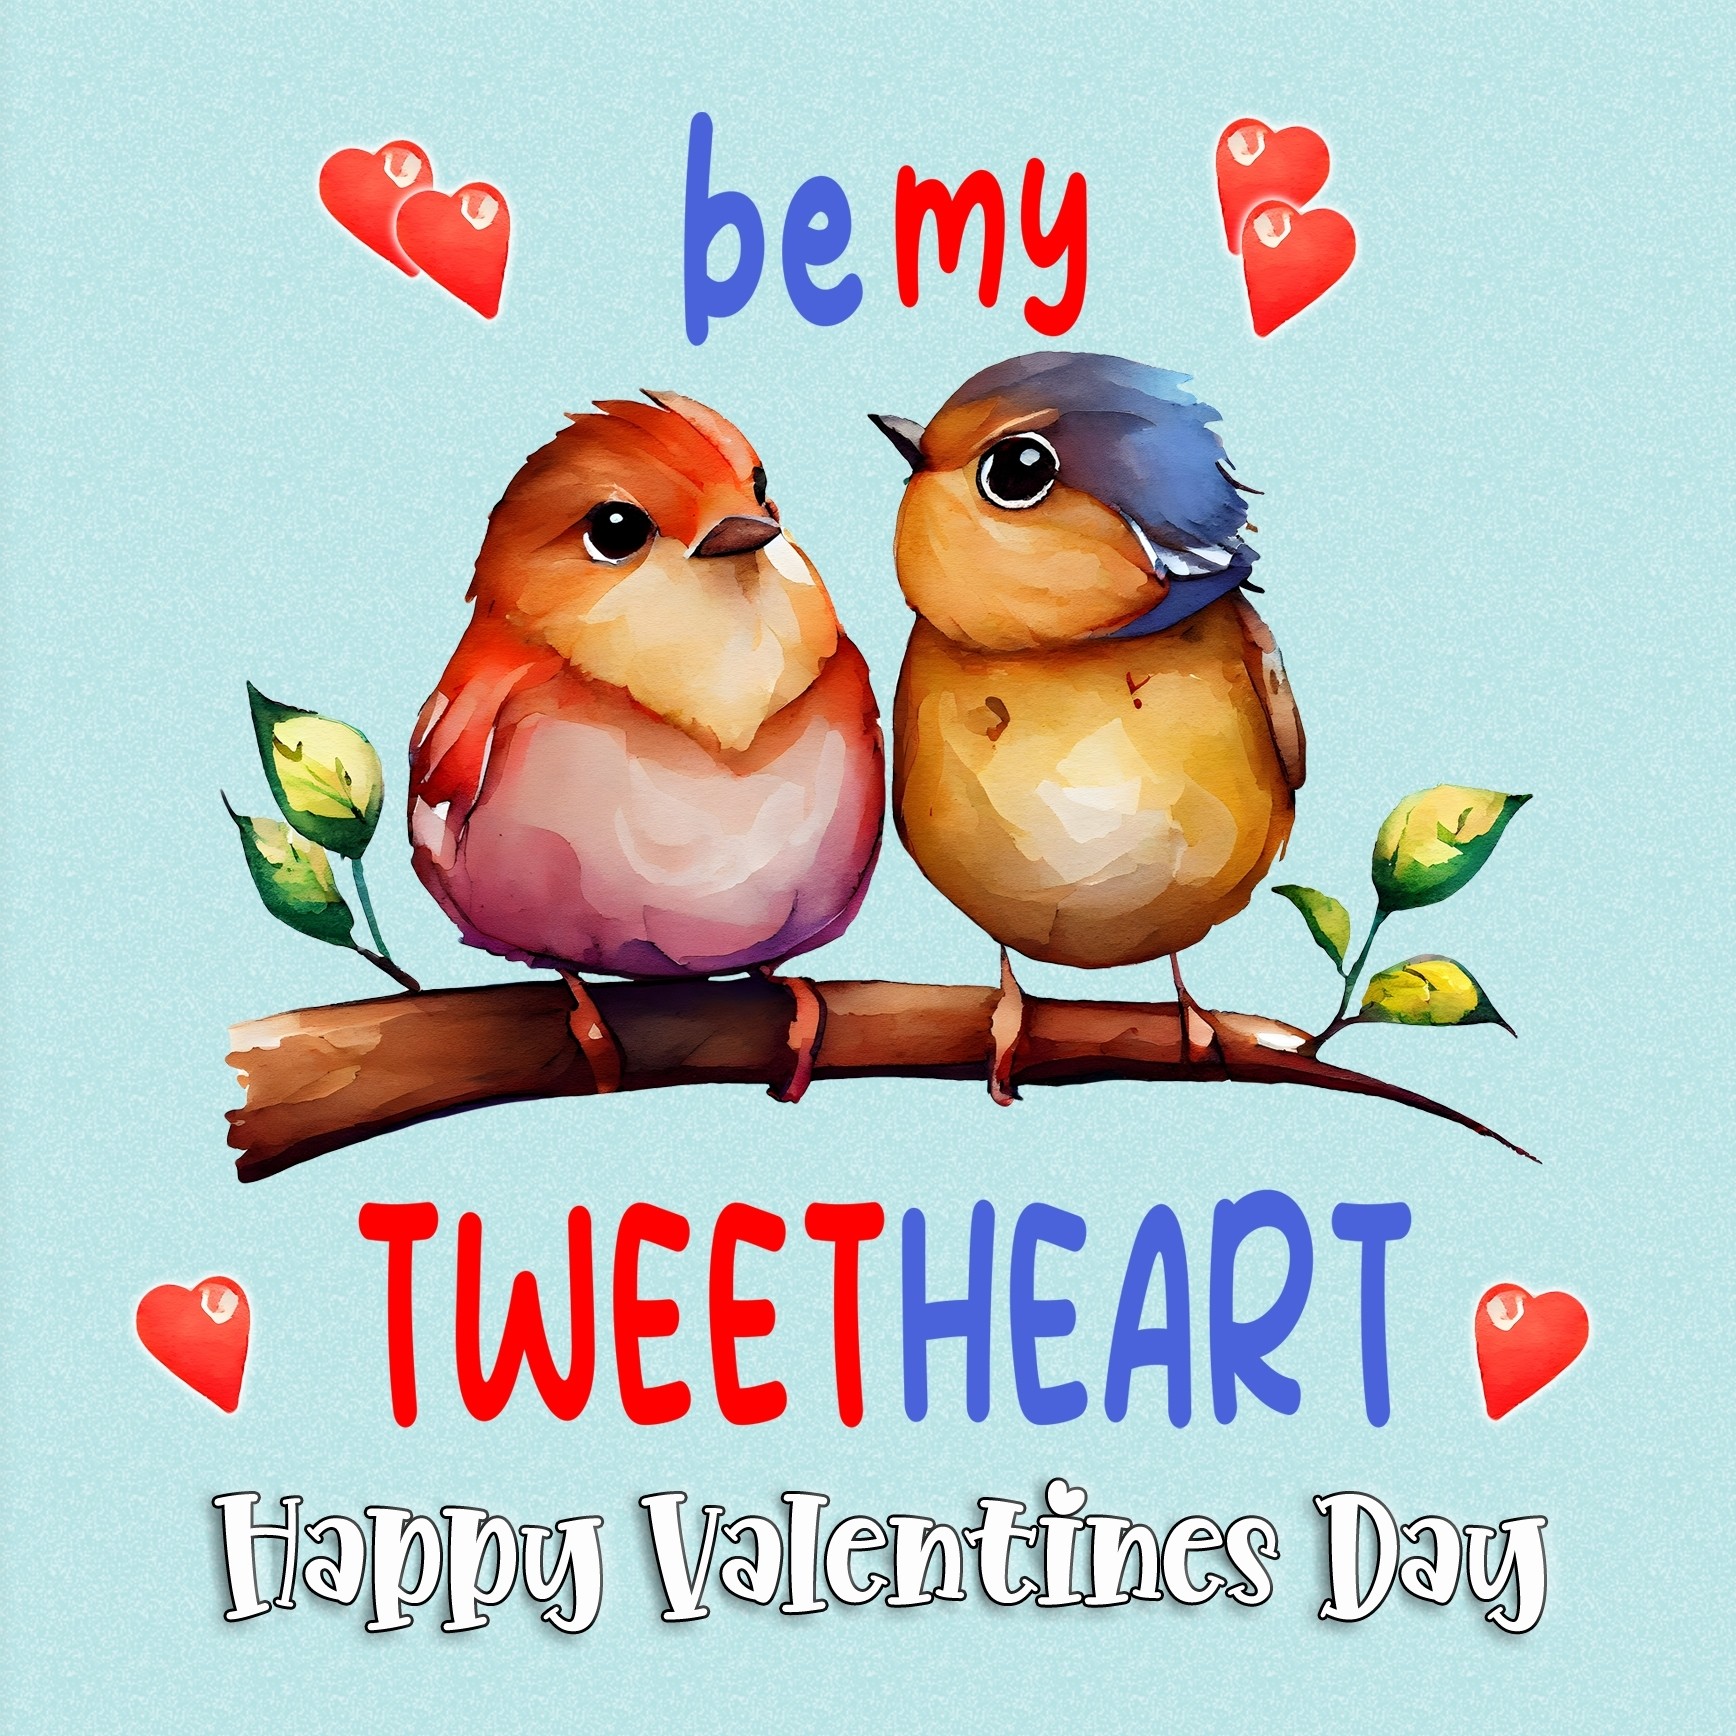 Funny Pun Valentines Day Square Card (Tweetheart)